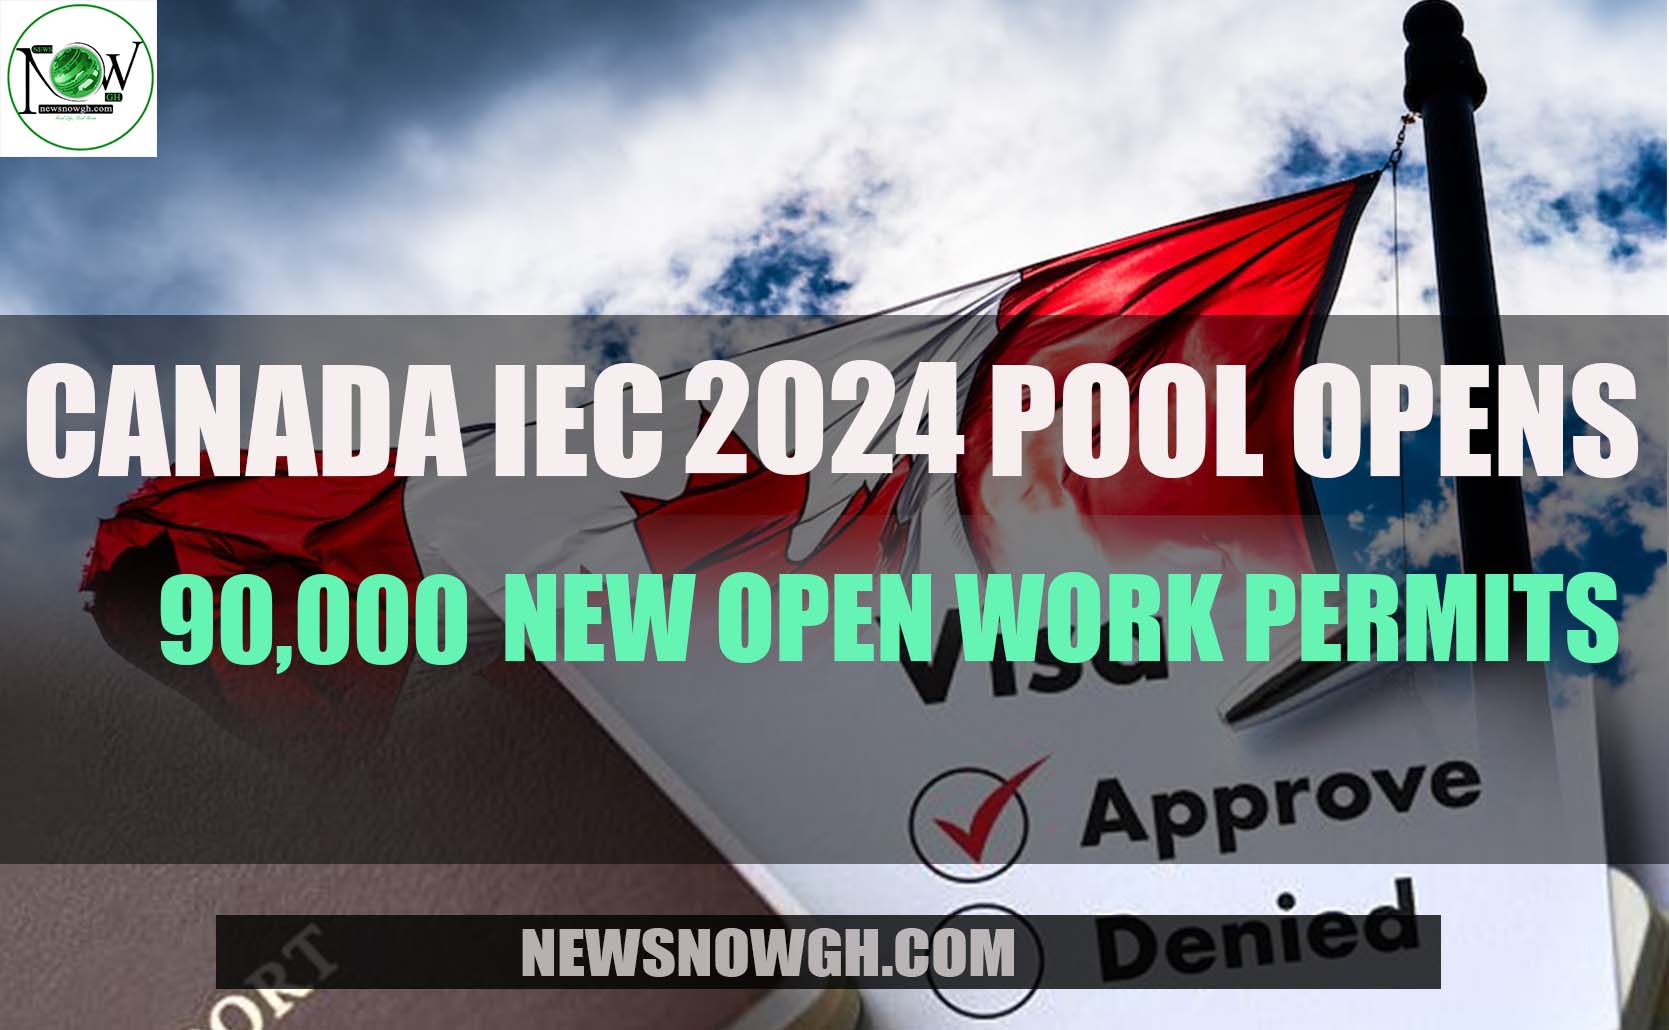 Canada IEC 2024 Pool Opens 90,000 New Open Work Permit